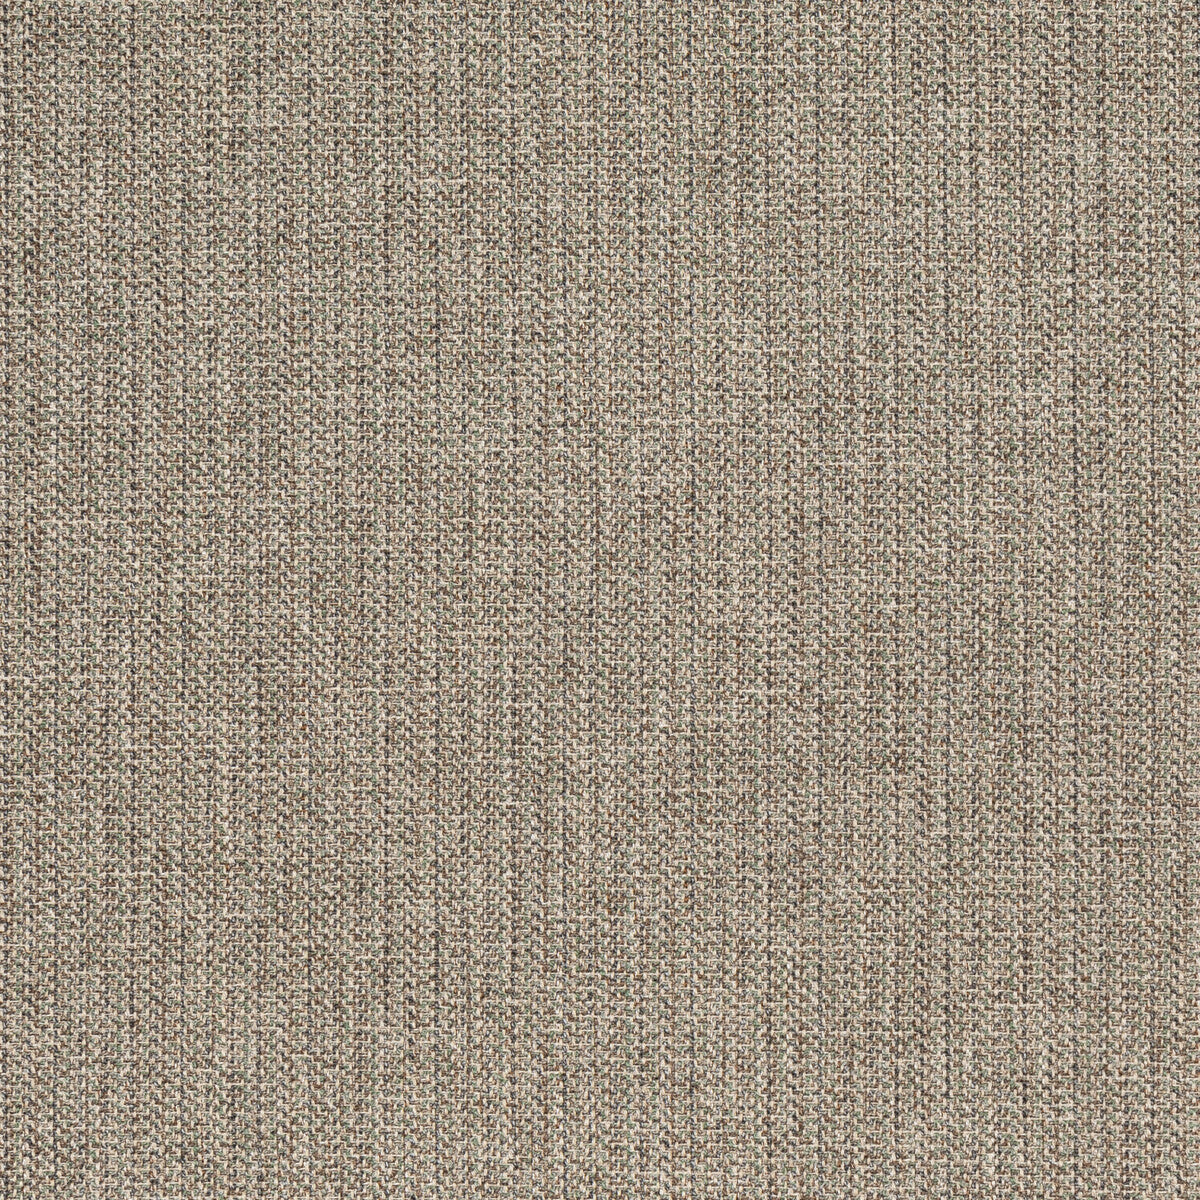 Casper fabric in mist color - pattern BFC-3712.1311.0 - by Lee Jofa in the Blithfield Eden collection